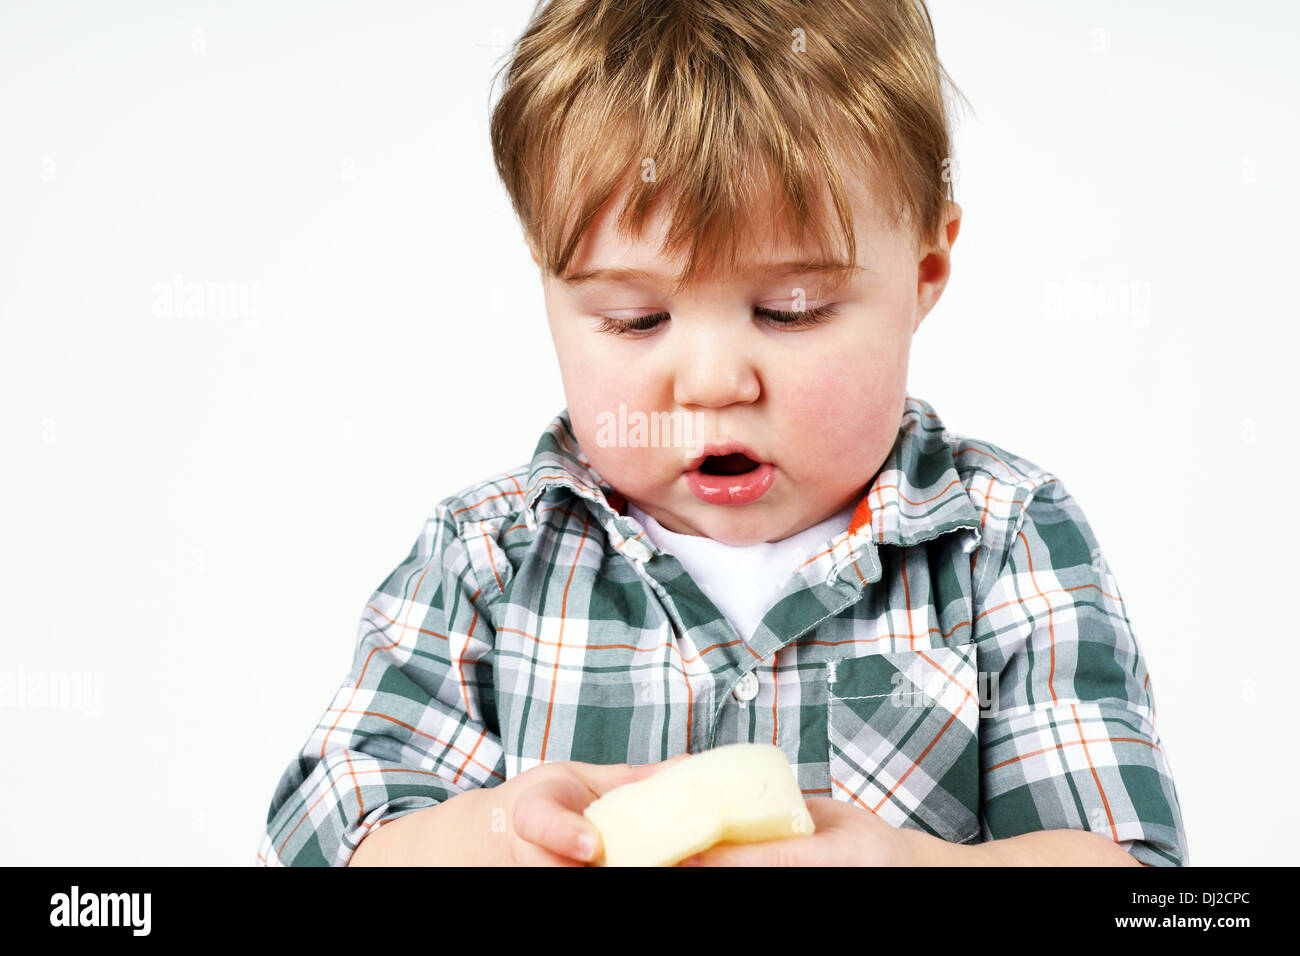 Cute little blond toddler boy discovering a sponge, growth or child development concept Stock Photo